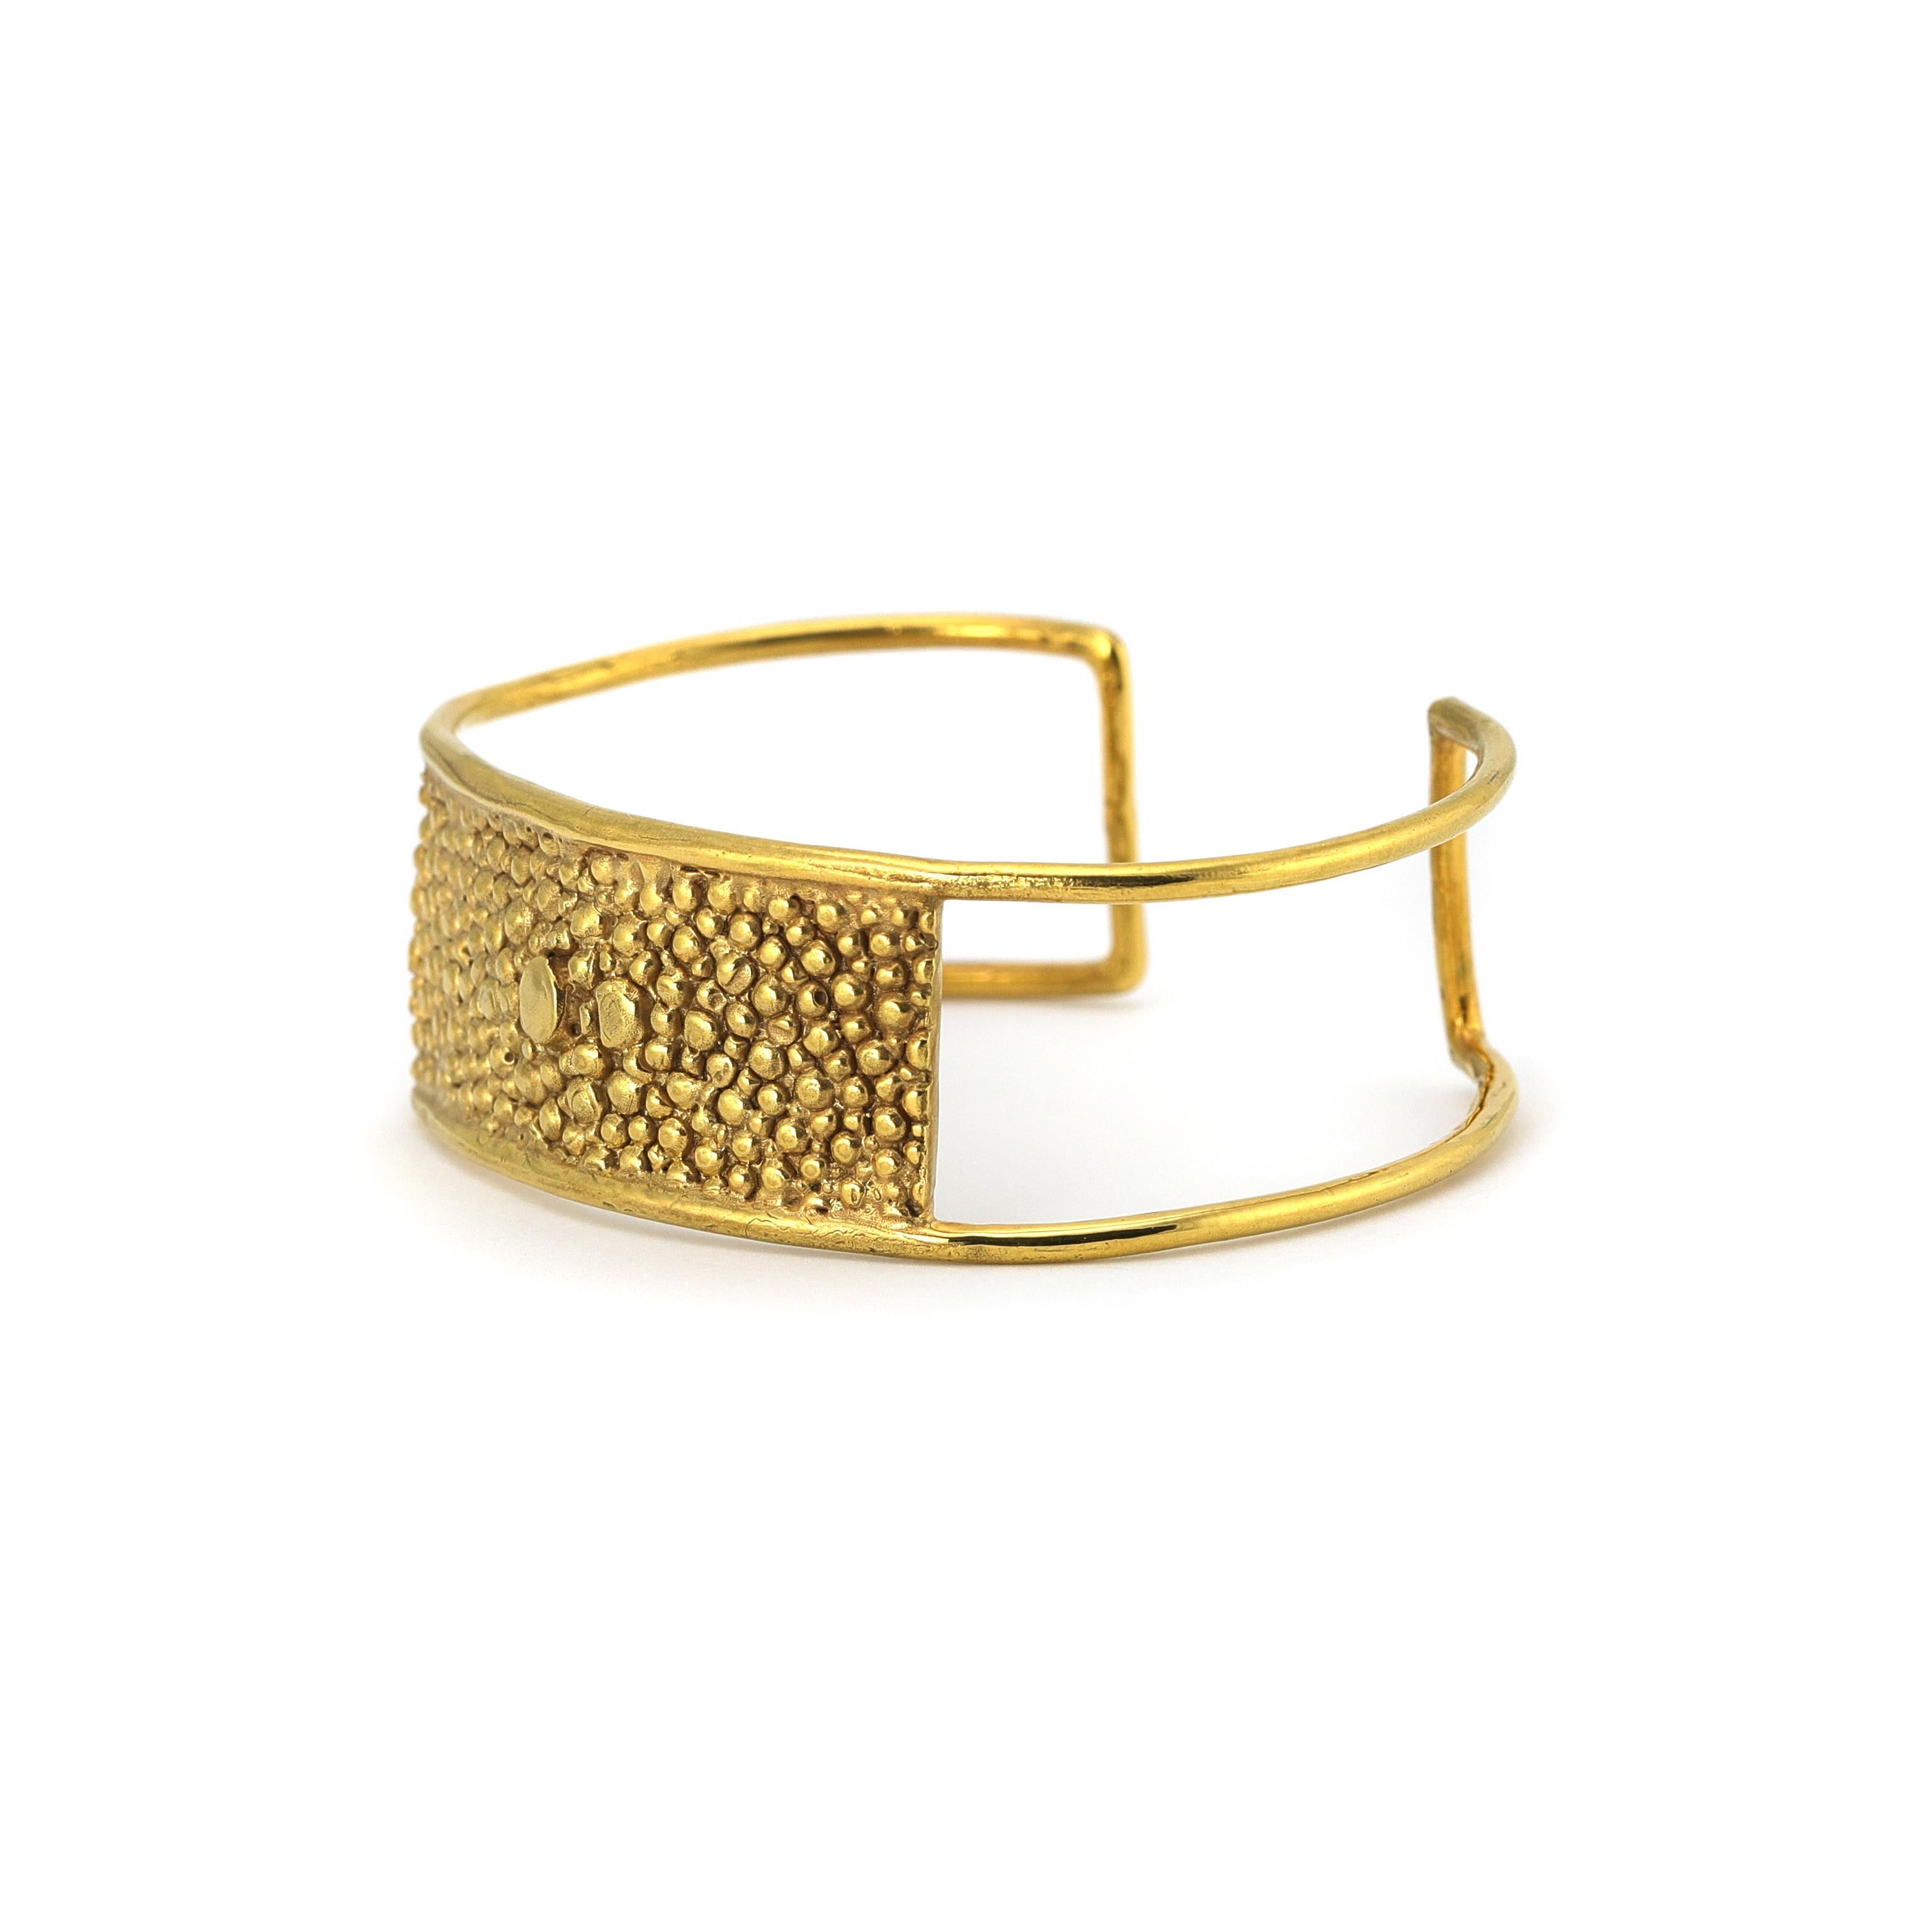 Stingray Bar Cuff bracelet featuring texture from stingray skin applied to metal.

Designed and created in New York by Lauren Newton.

Lauren Newton Jewelry is an exclusive jewelry brand designed and crafted by Lauren Newton. 
While Lauren has